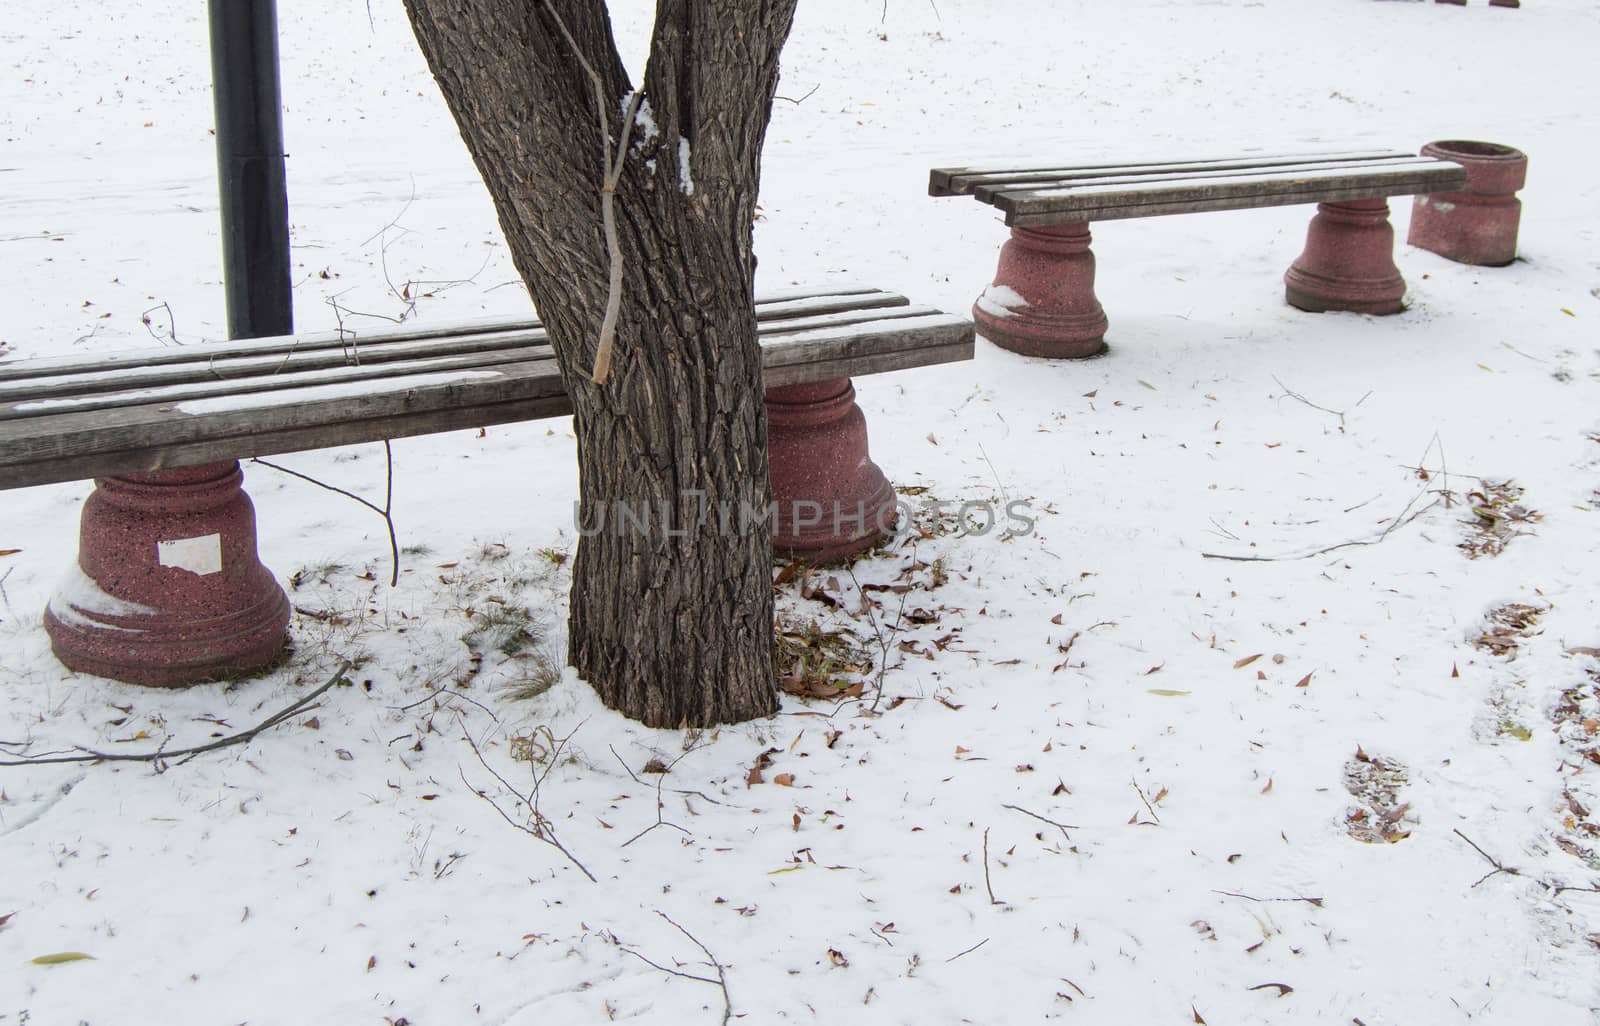 Several wooden benches in the winter city Park, the first snow by claire_lucia